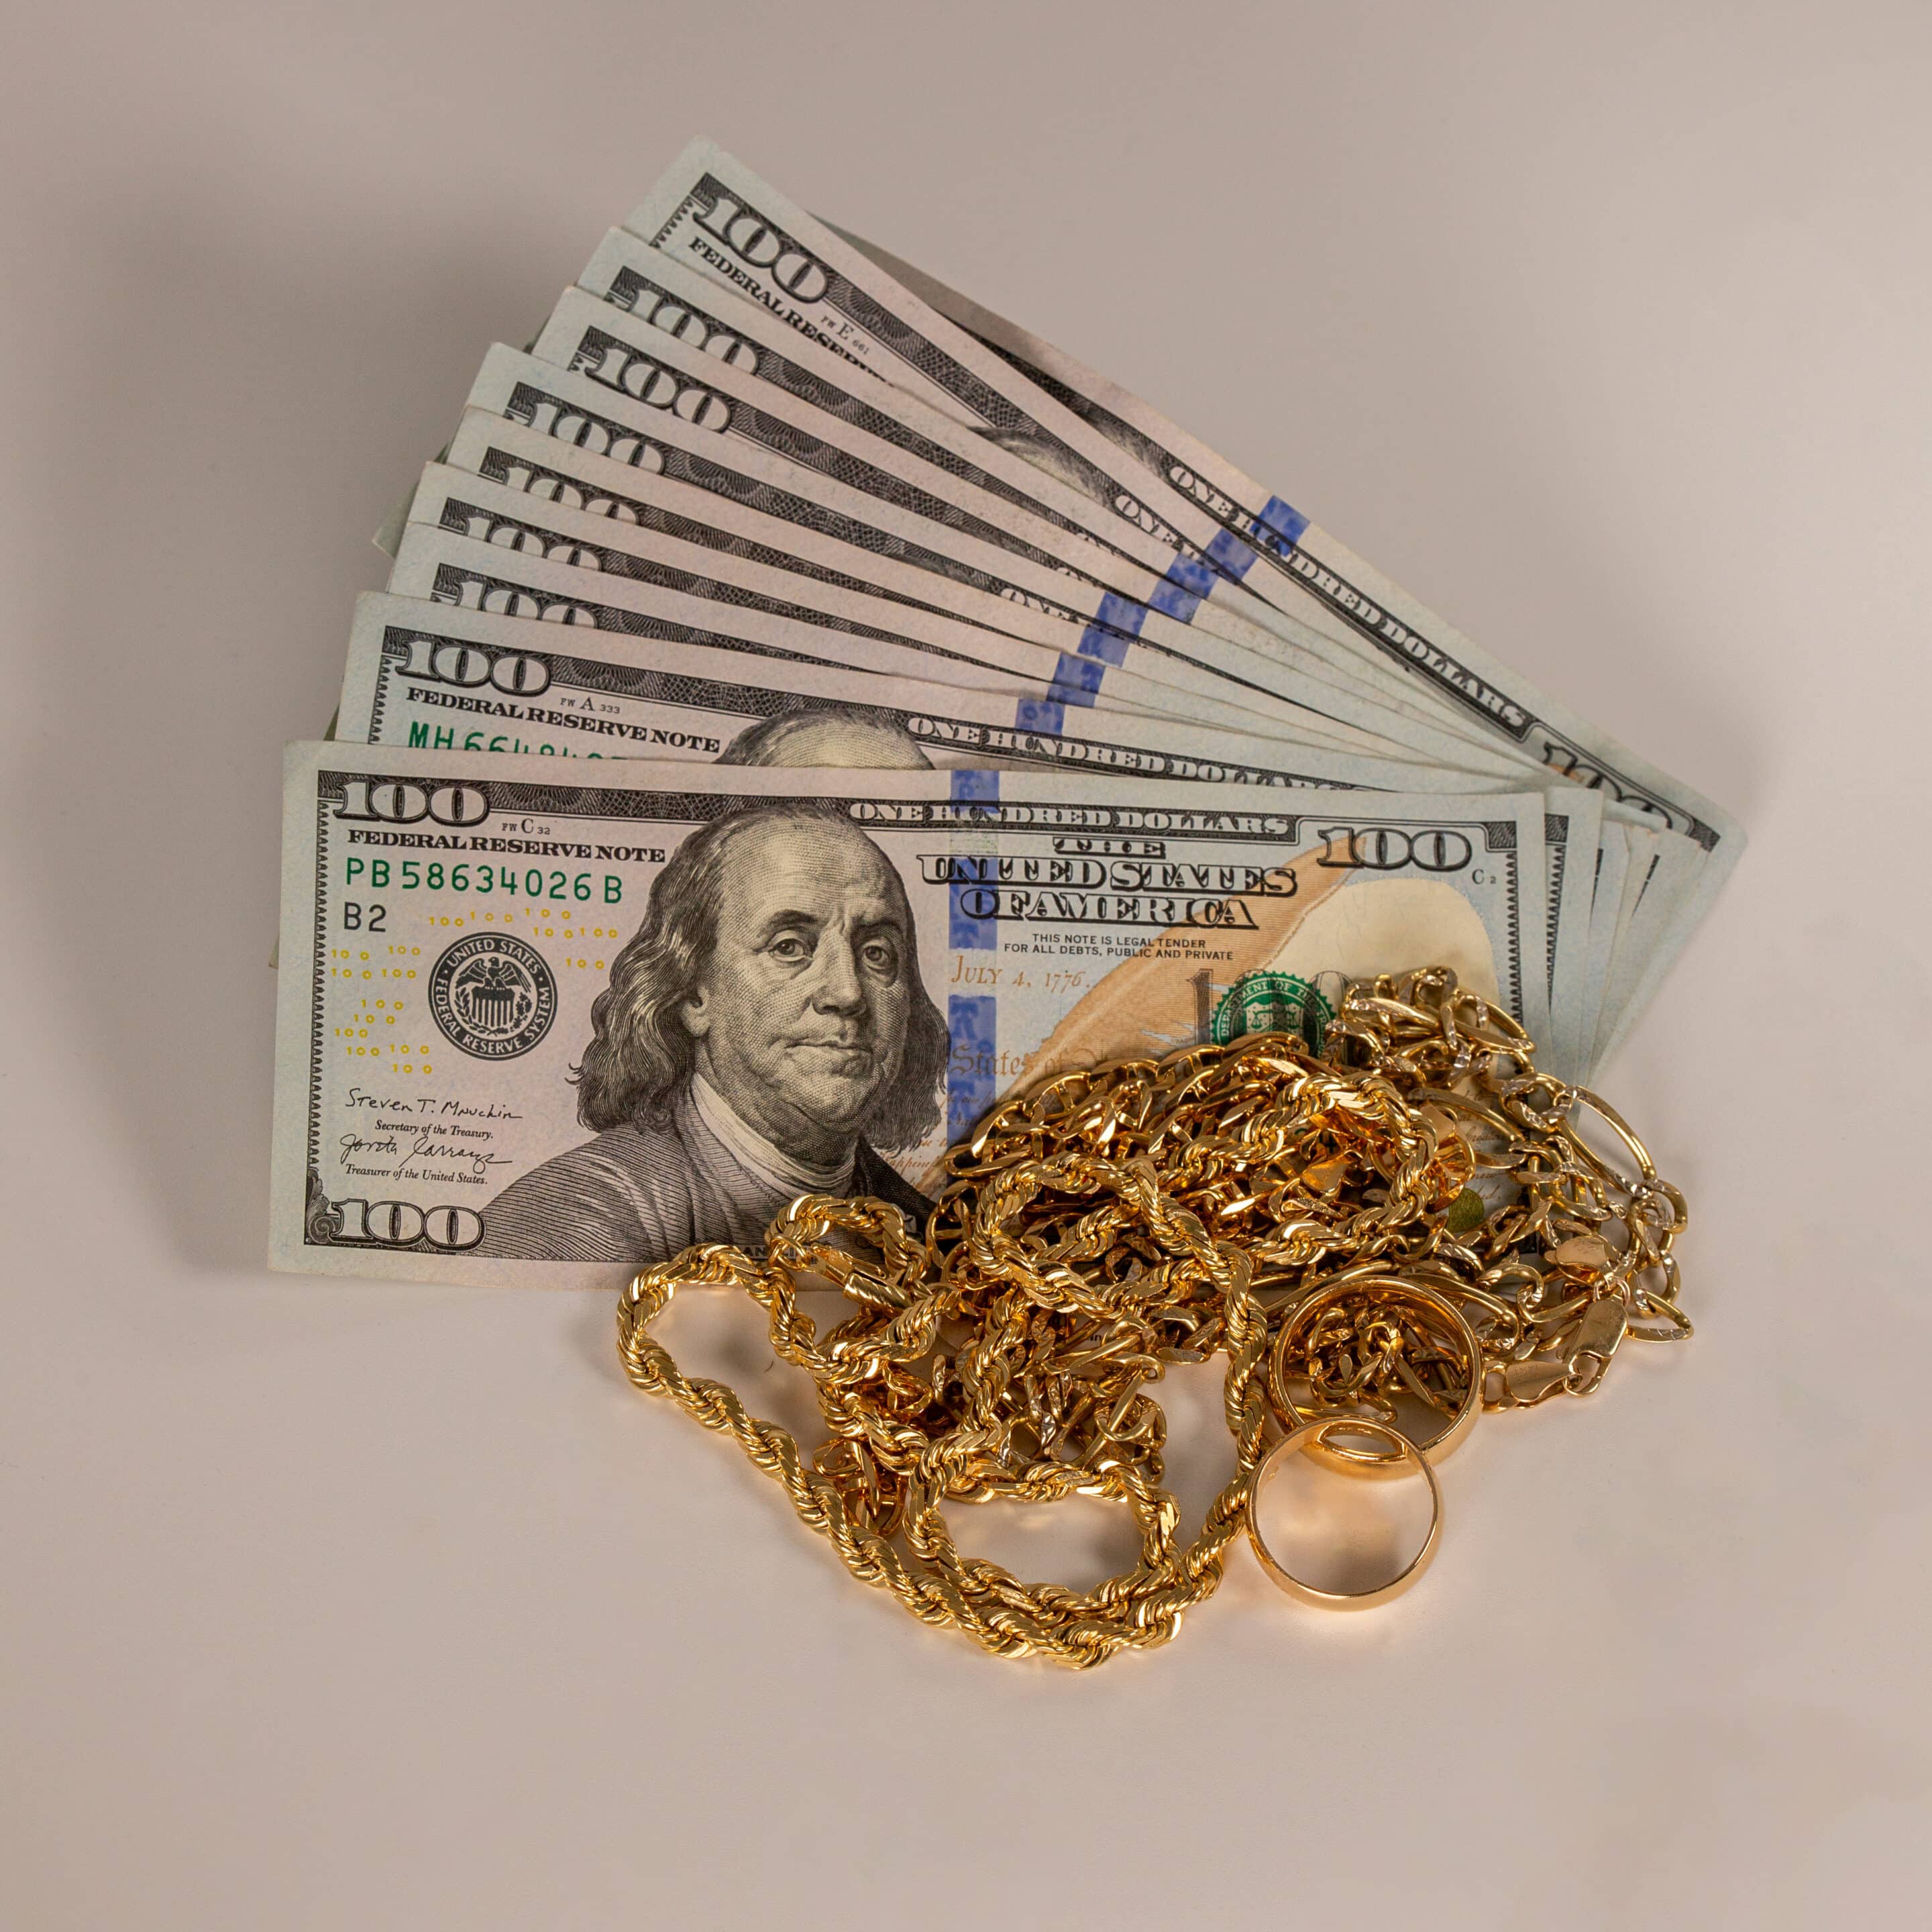 Scrap gold pieces placed on a pile of various currency bills.